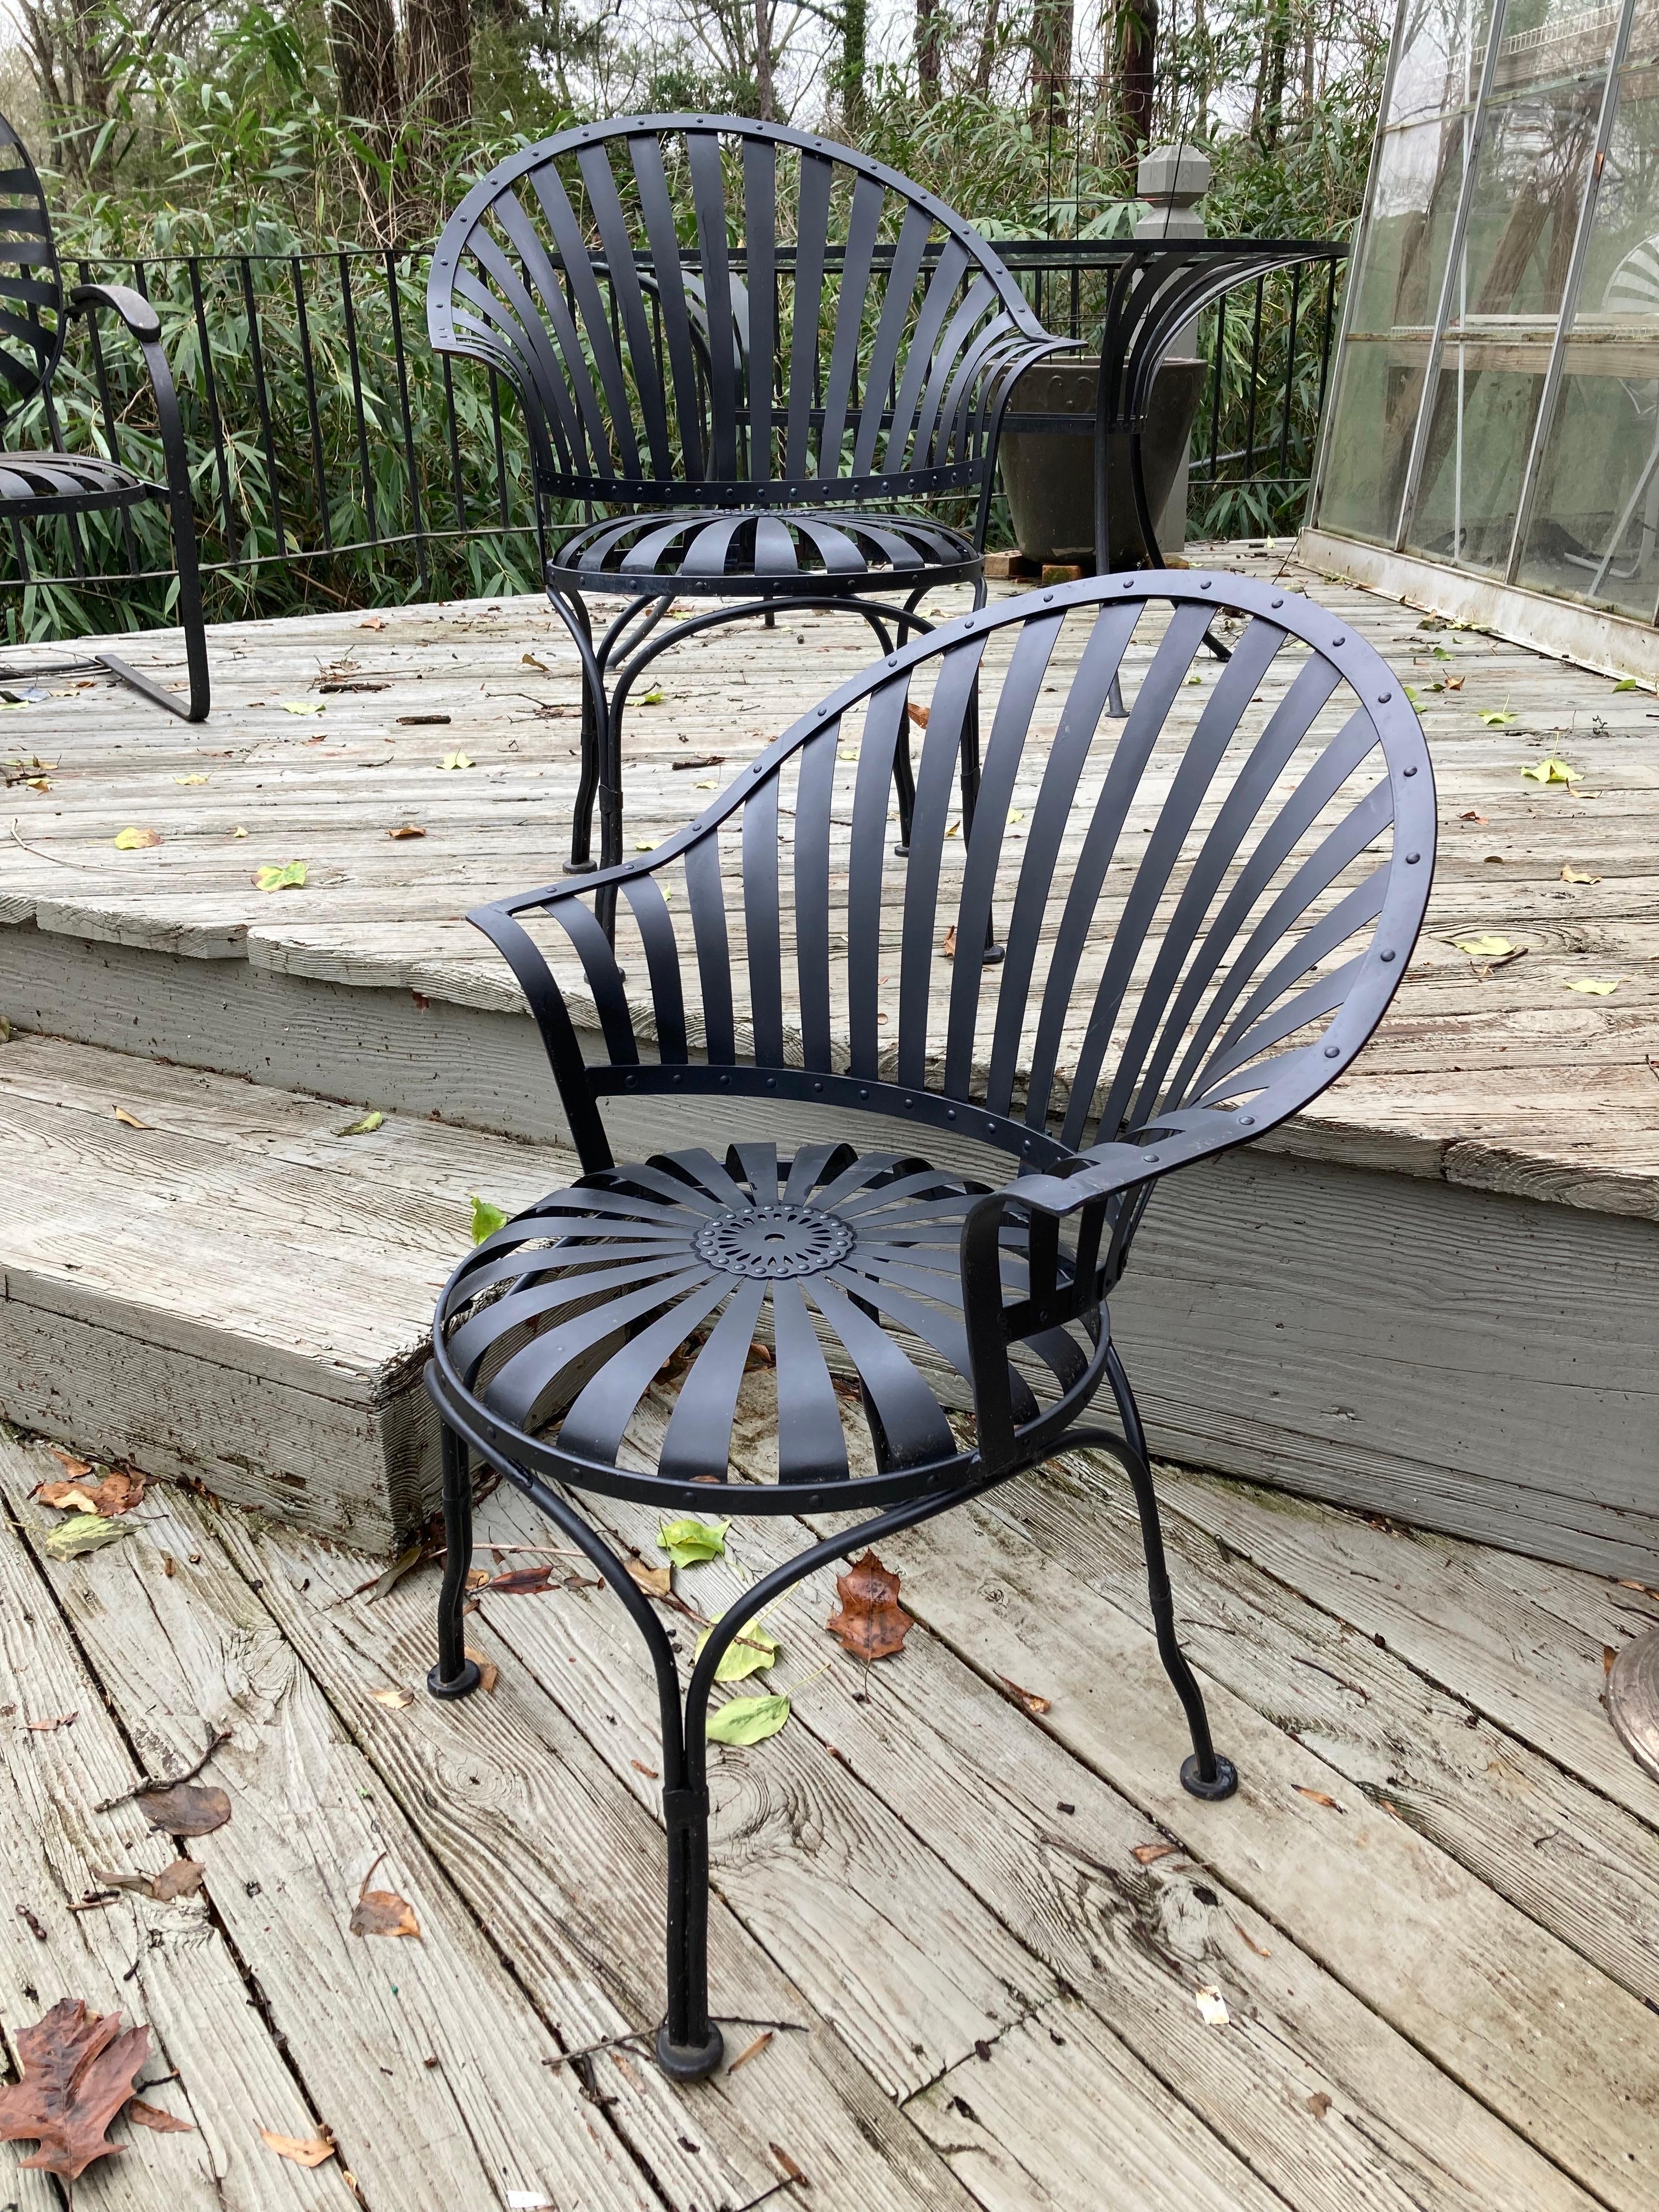 cool old hollywood glamorous duo, dating back to 1930. works for the patio or inside. super comfortable, spring sunburst seating
no maker’s mark
recently sandblasted, professionally primed and painted

26.75ʺW × 17.75ʺD × 34ʺH

shipping from athens,